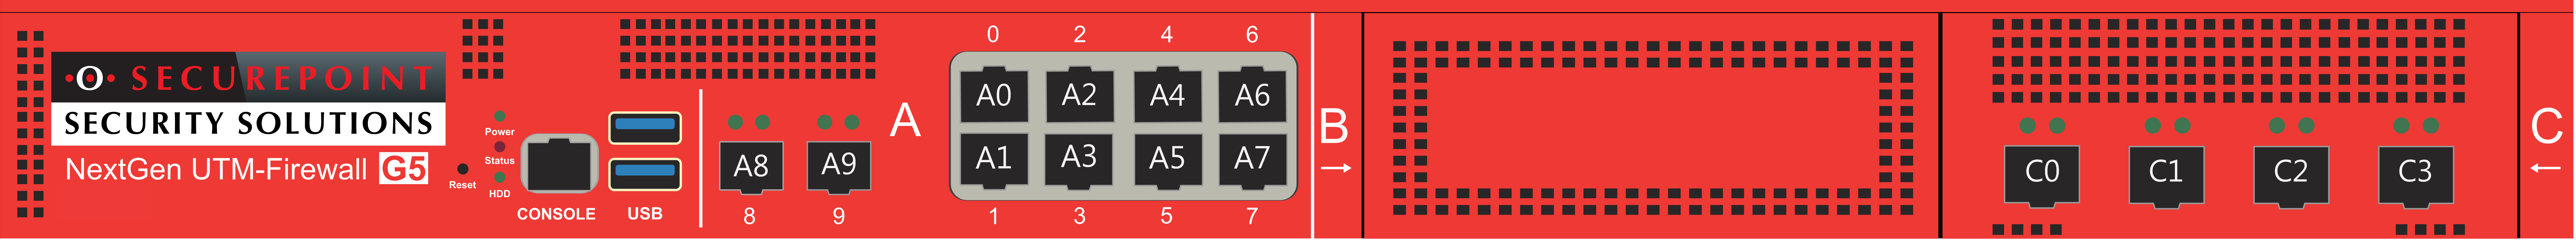 Datei:RC 350-1000 Slot A+C4.png